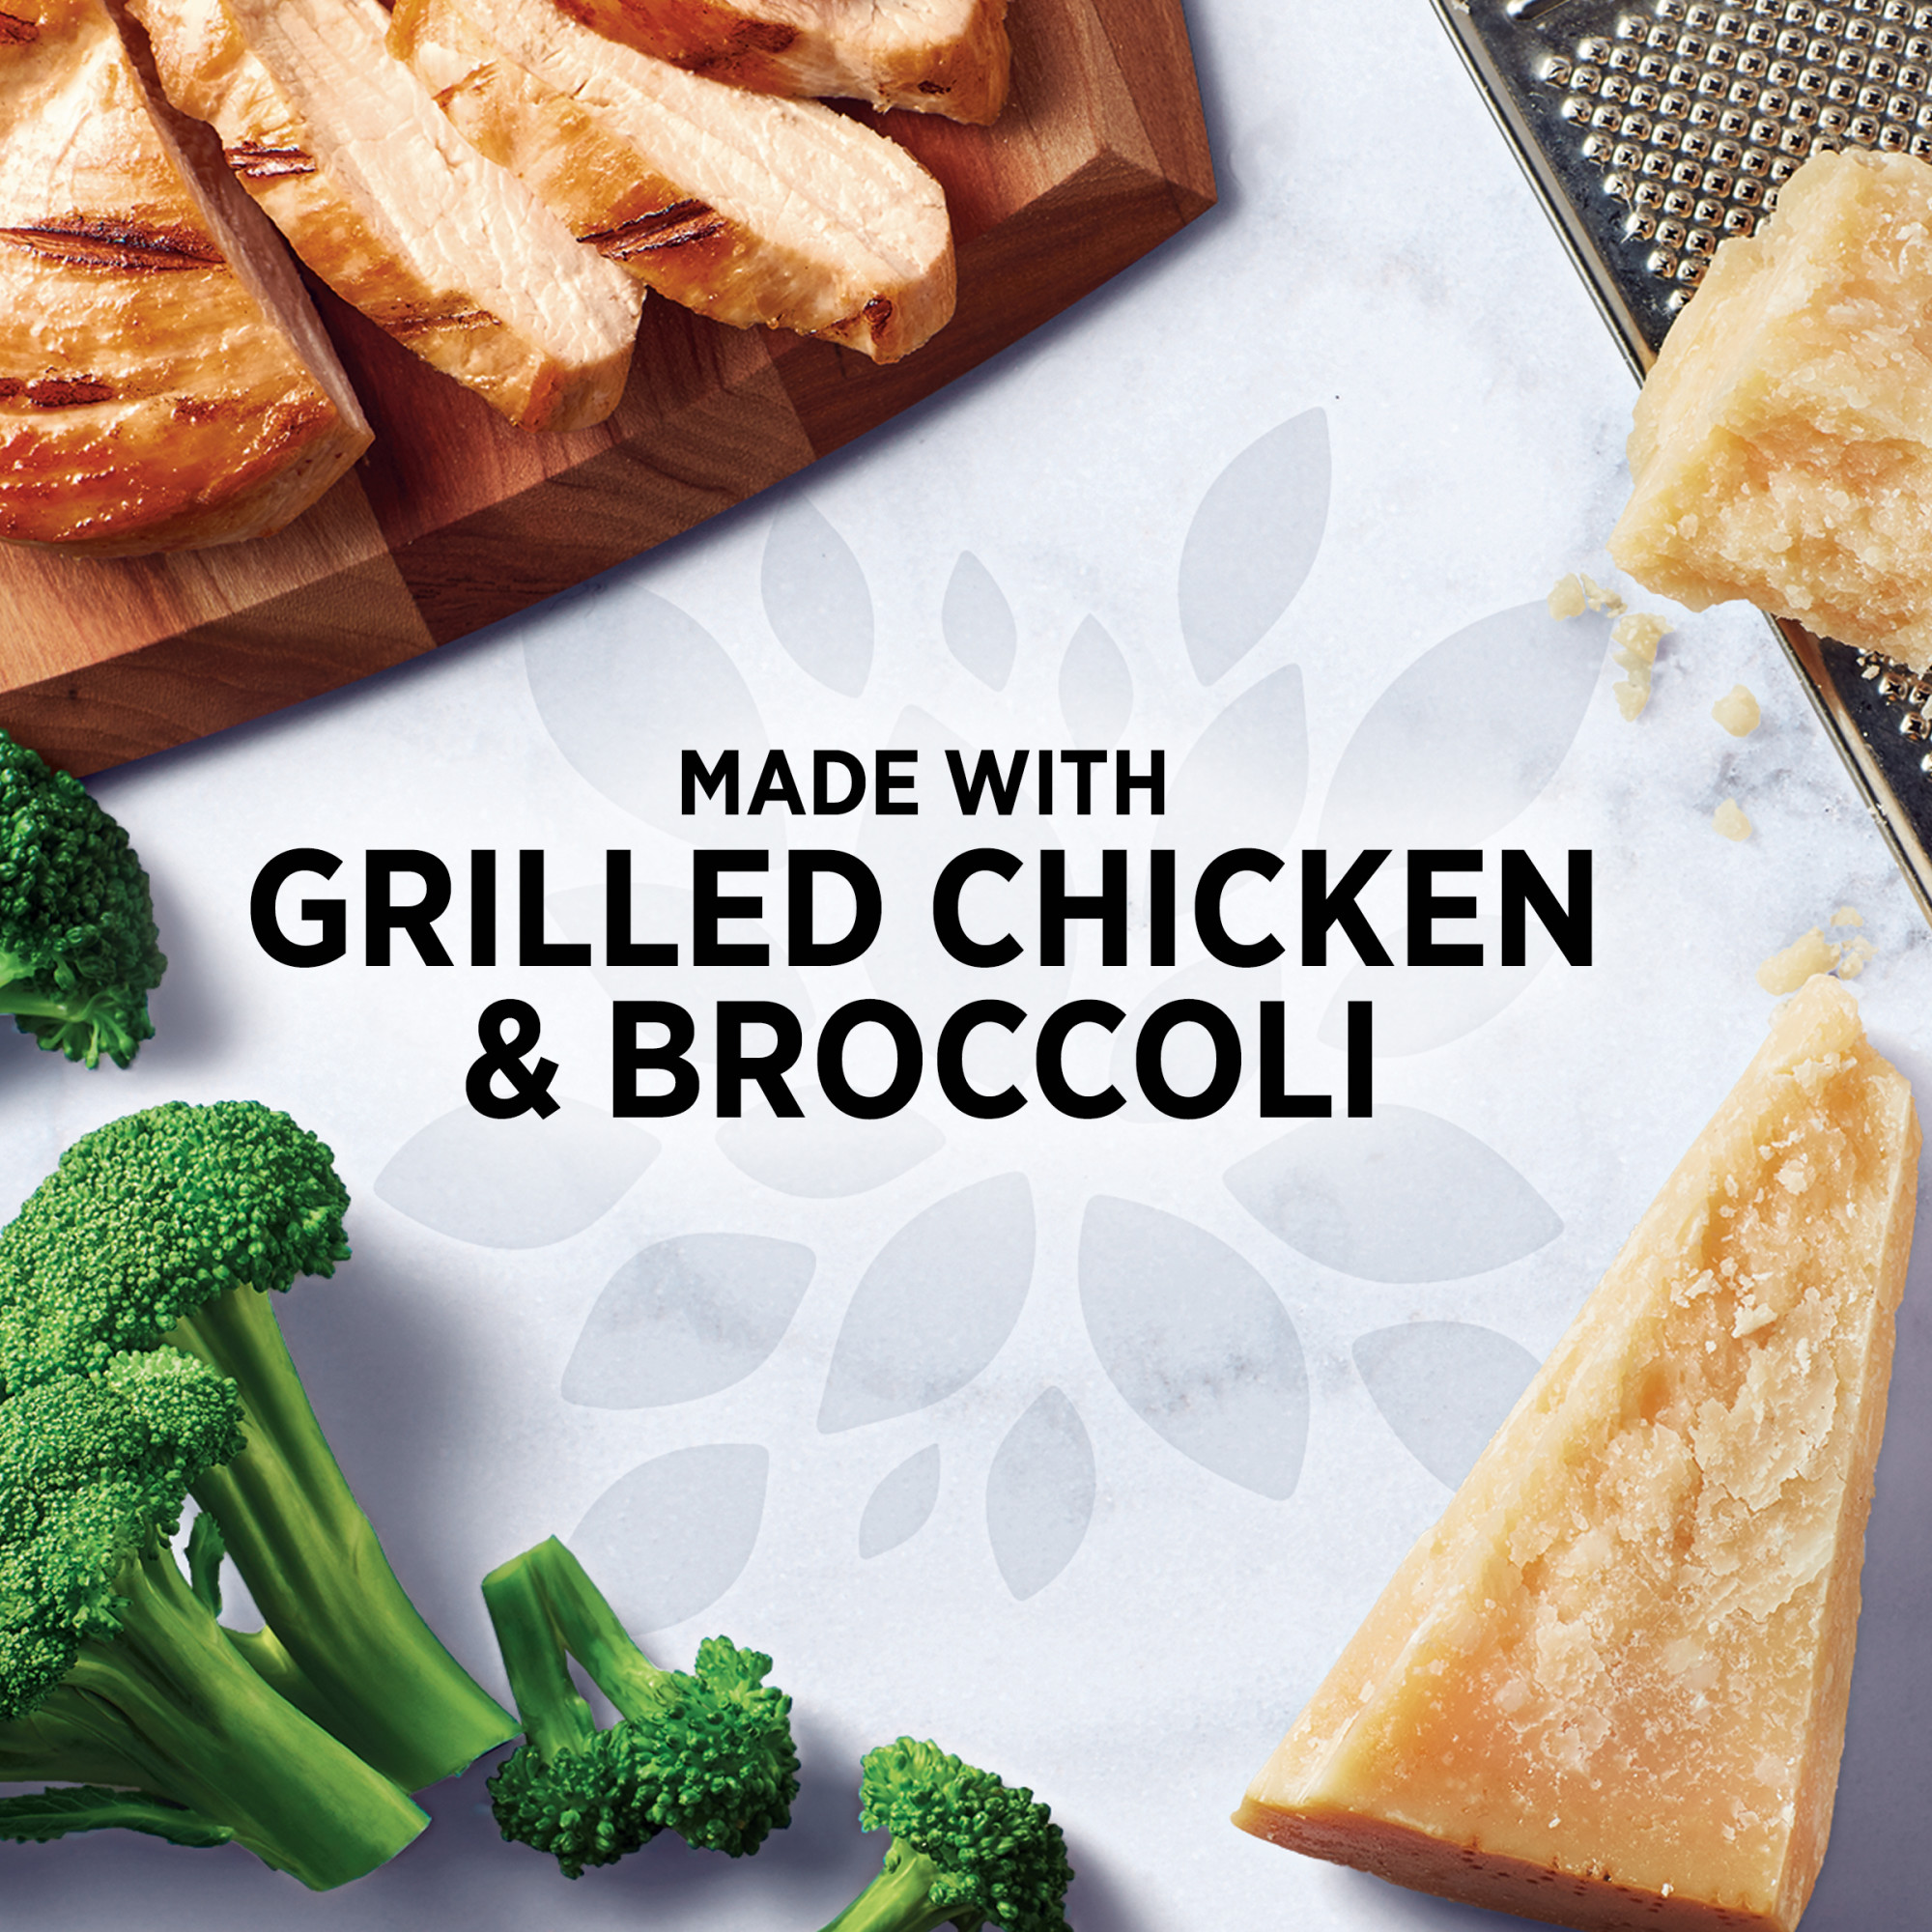 Healthy Choice Simply Steamers Grilled Chicken & Broccoli Alfredo, 9.15 oz (frozen) - image 3 of 8